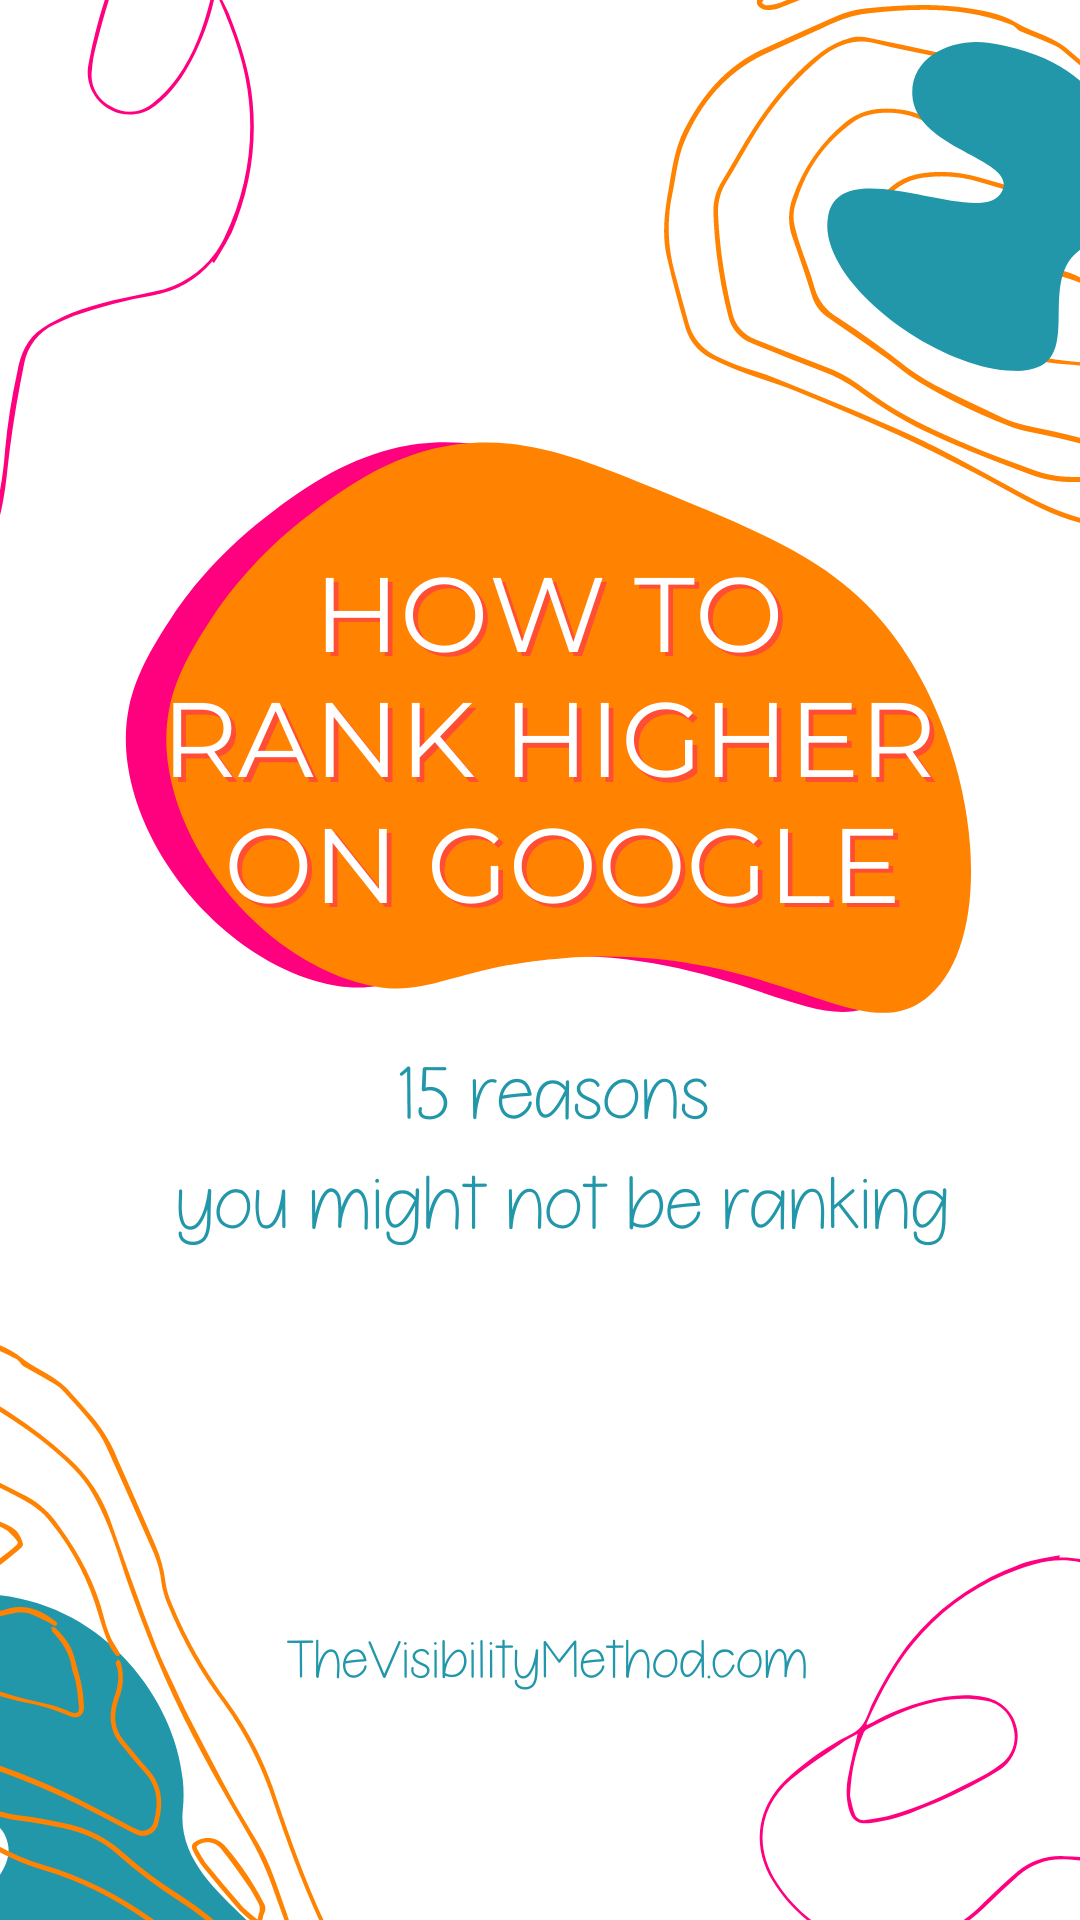 Here are 15 reasons your site may not be ranking on Google.